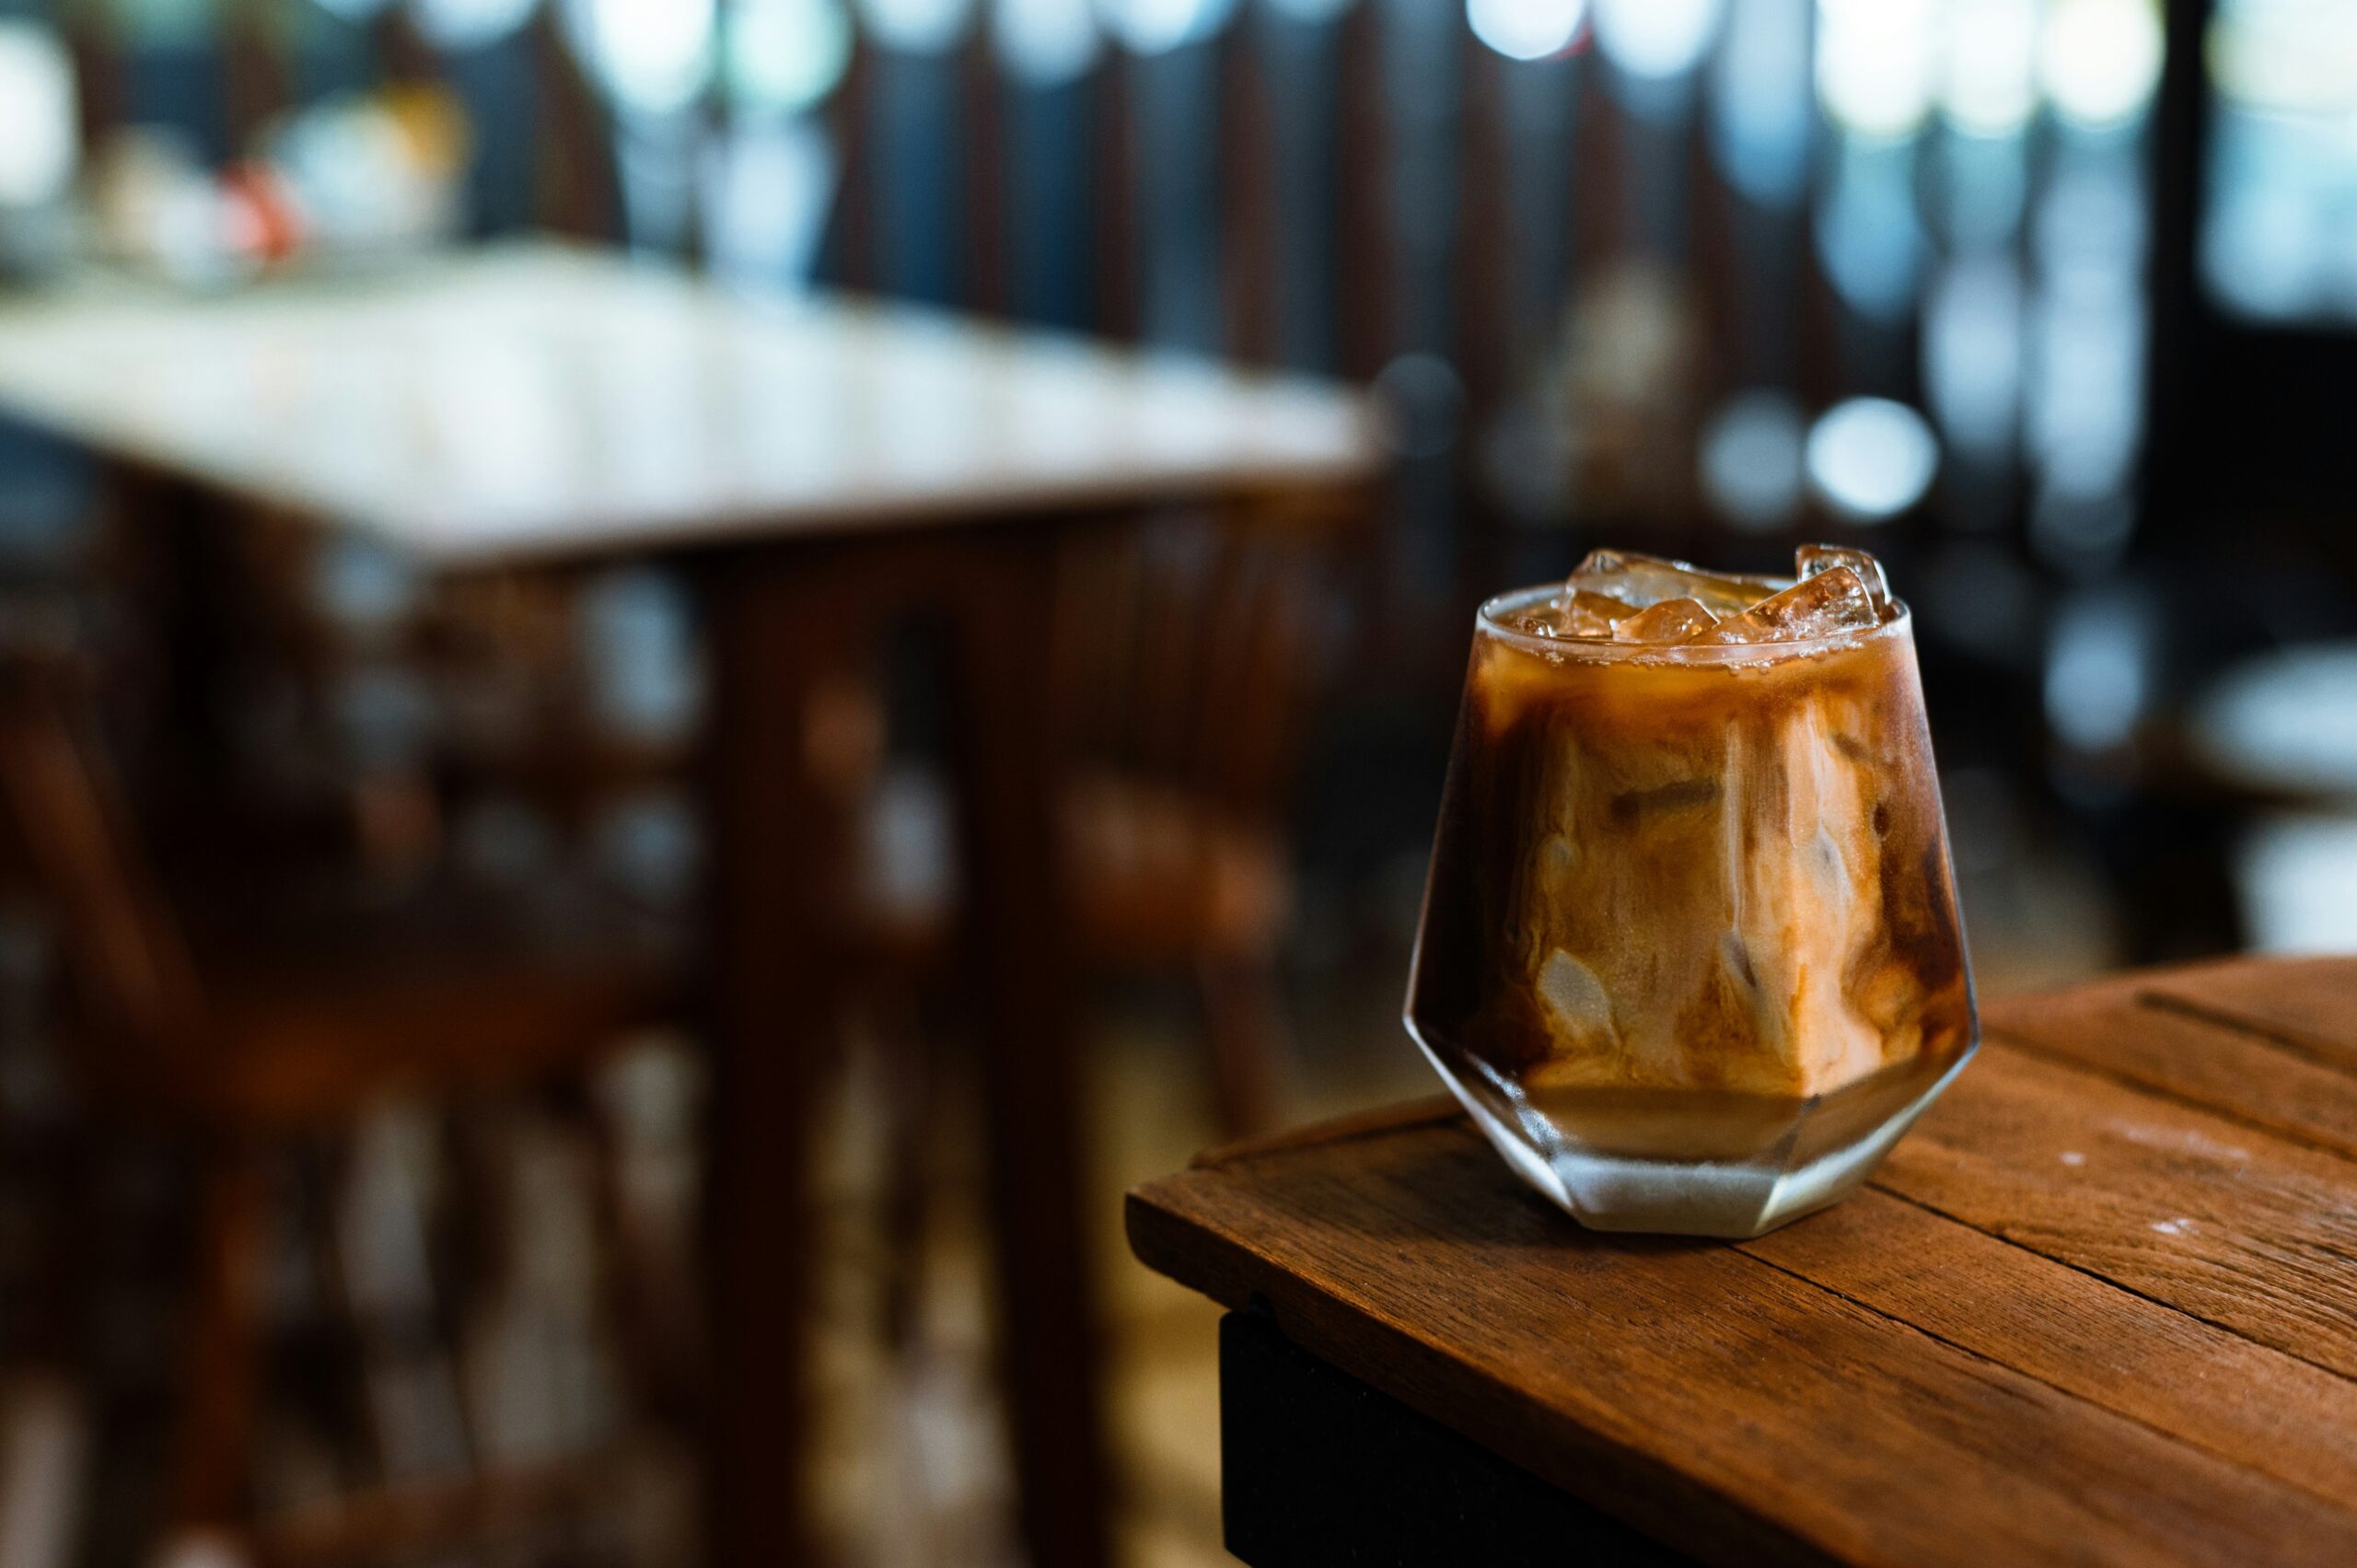 Try a classic iced mocha for your next Nespresso recipe. Pictured: An iced mocha